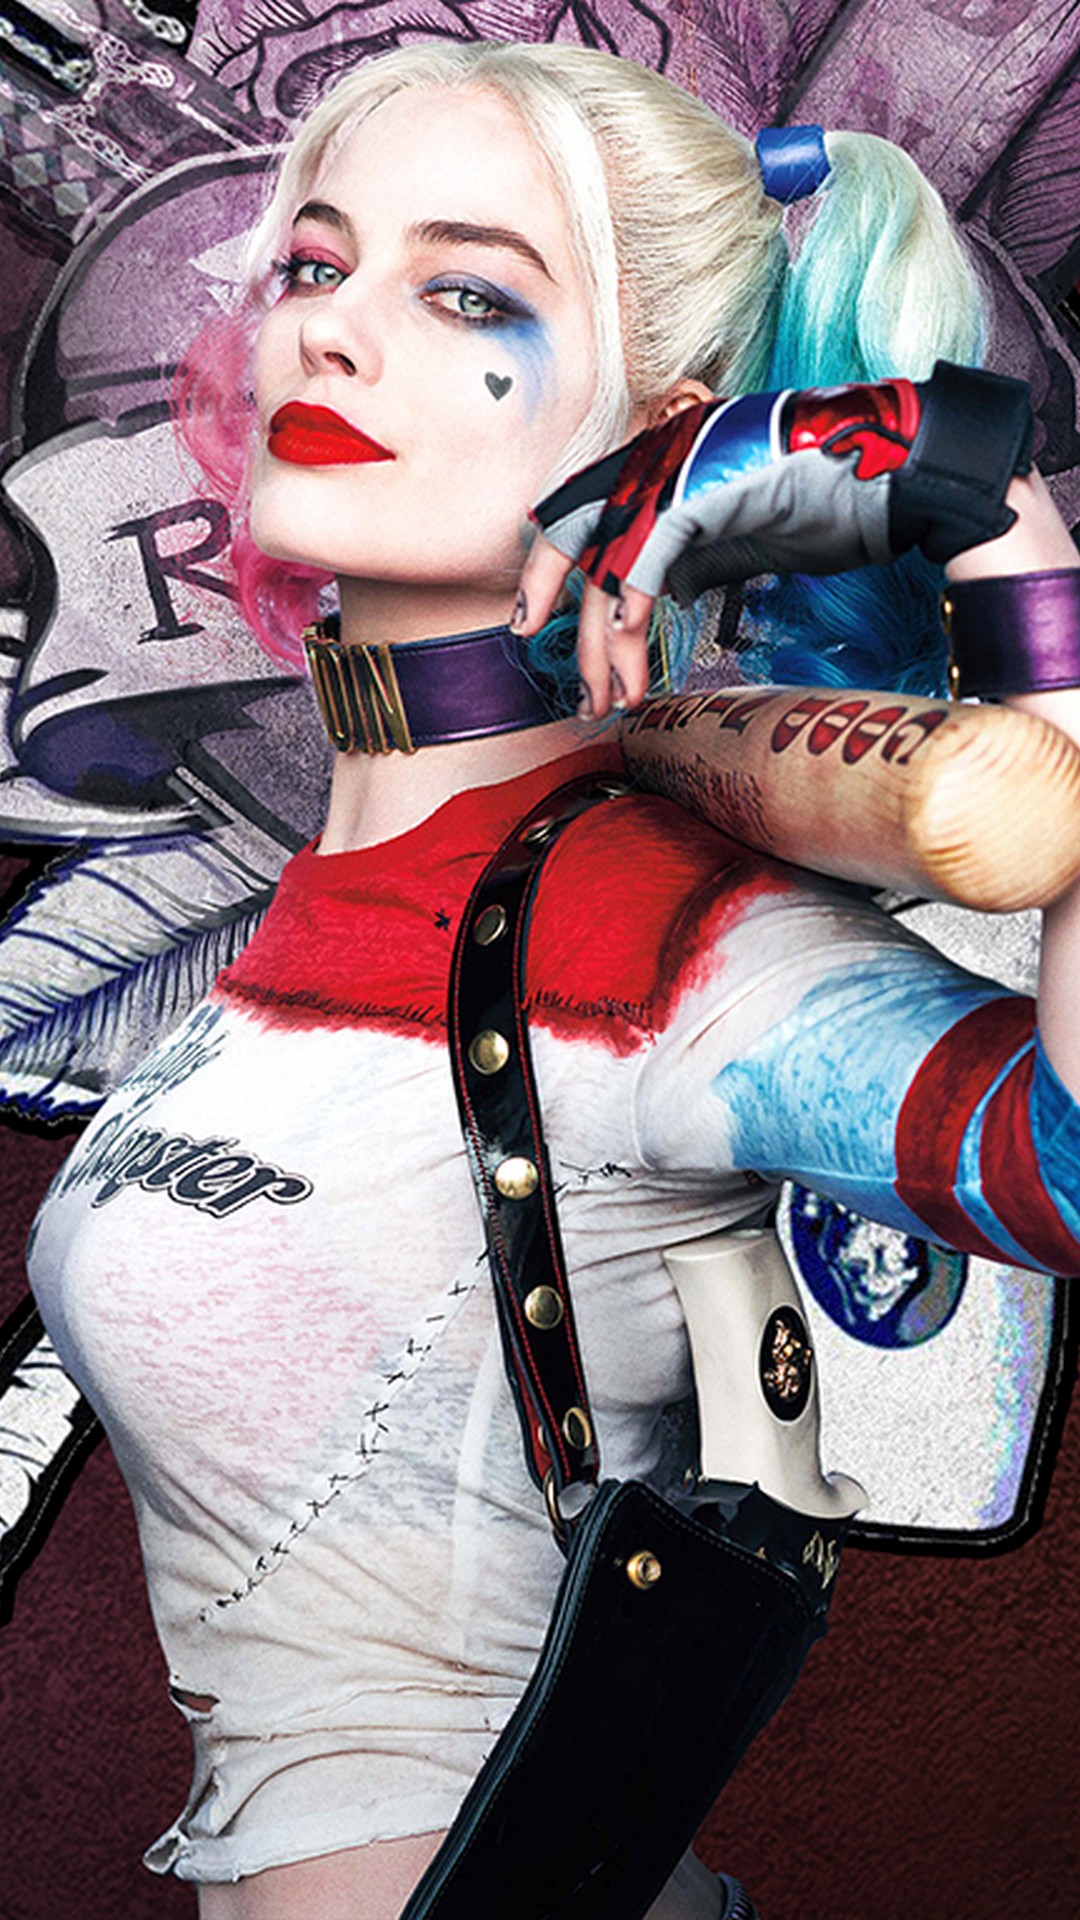 harley quinn wallpaper for iphone,arm,cool,harley quinn,fictional character,cosplay